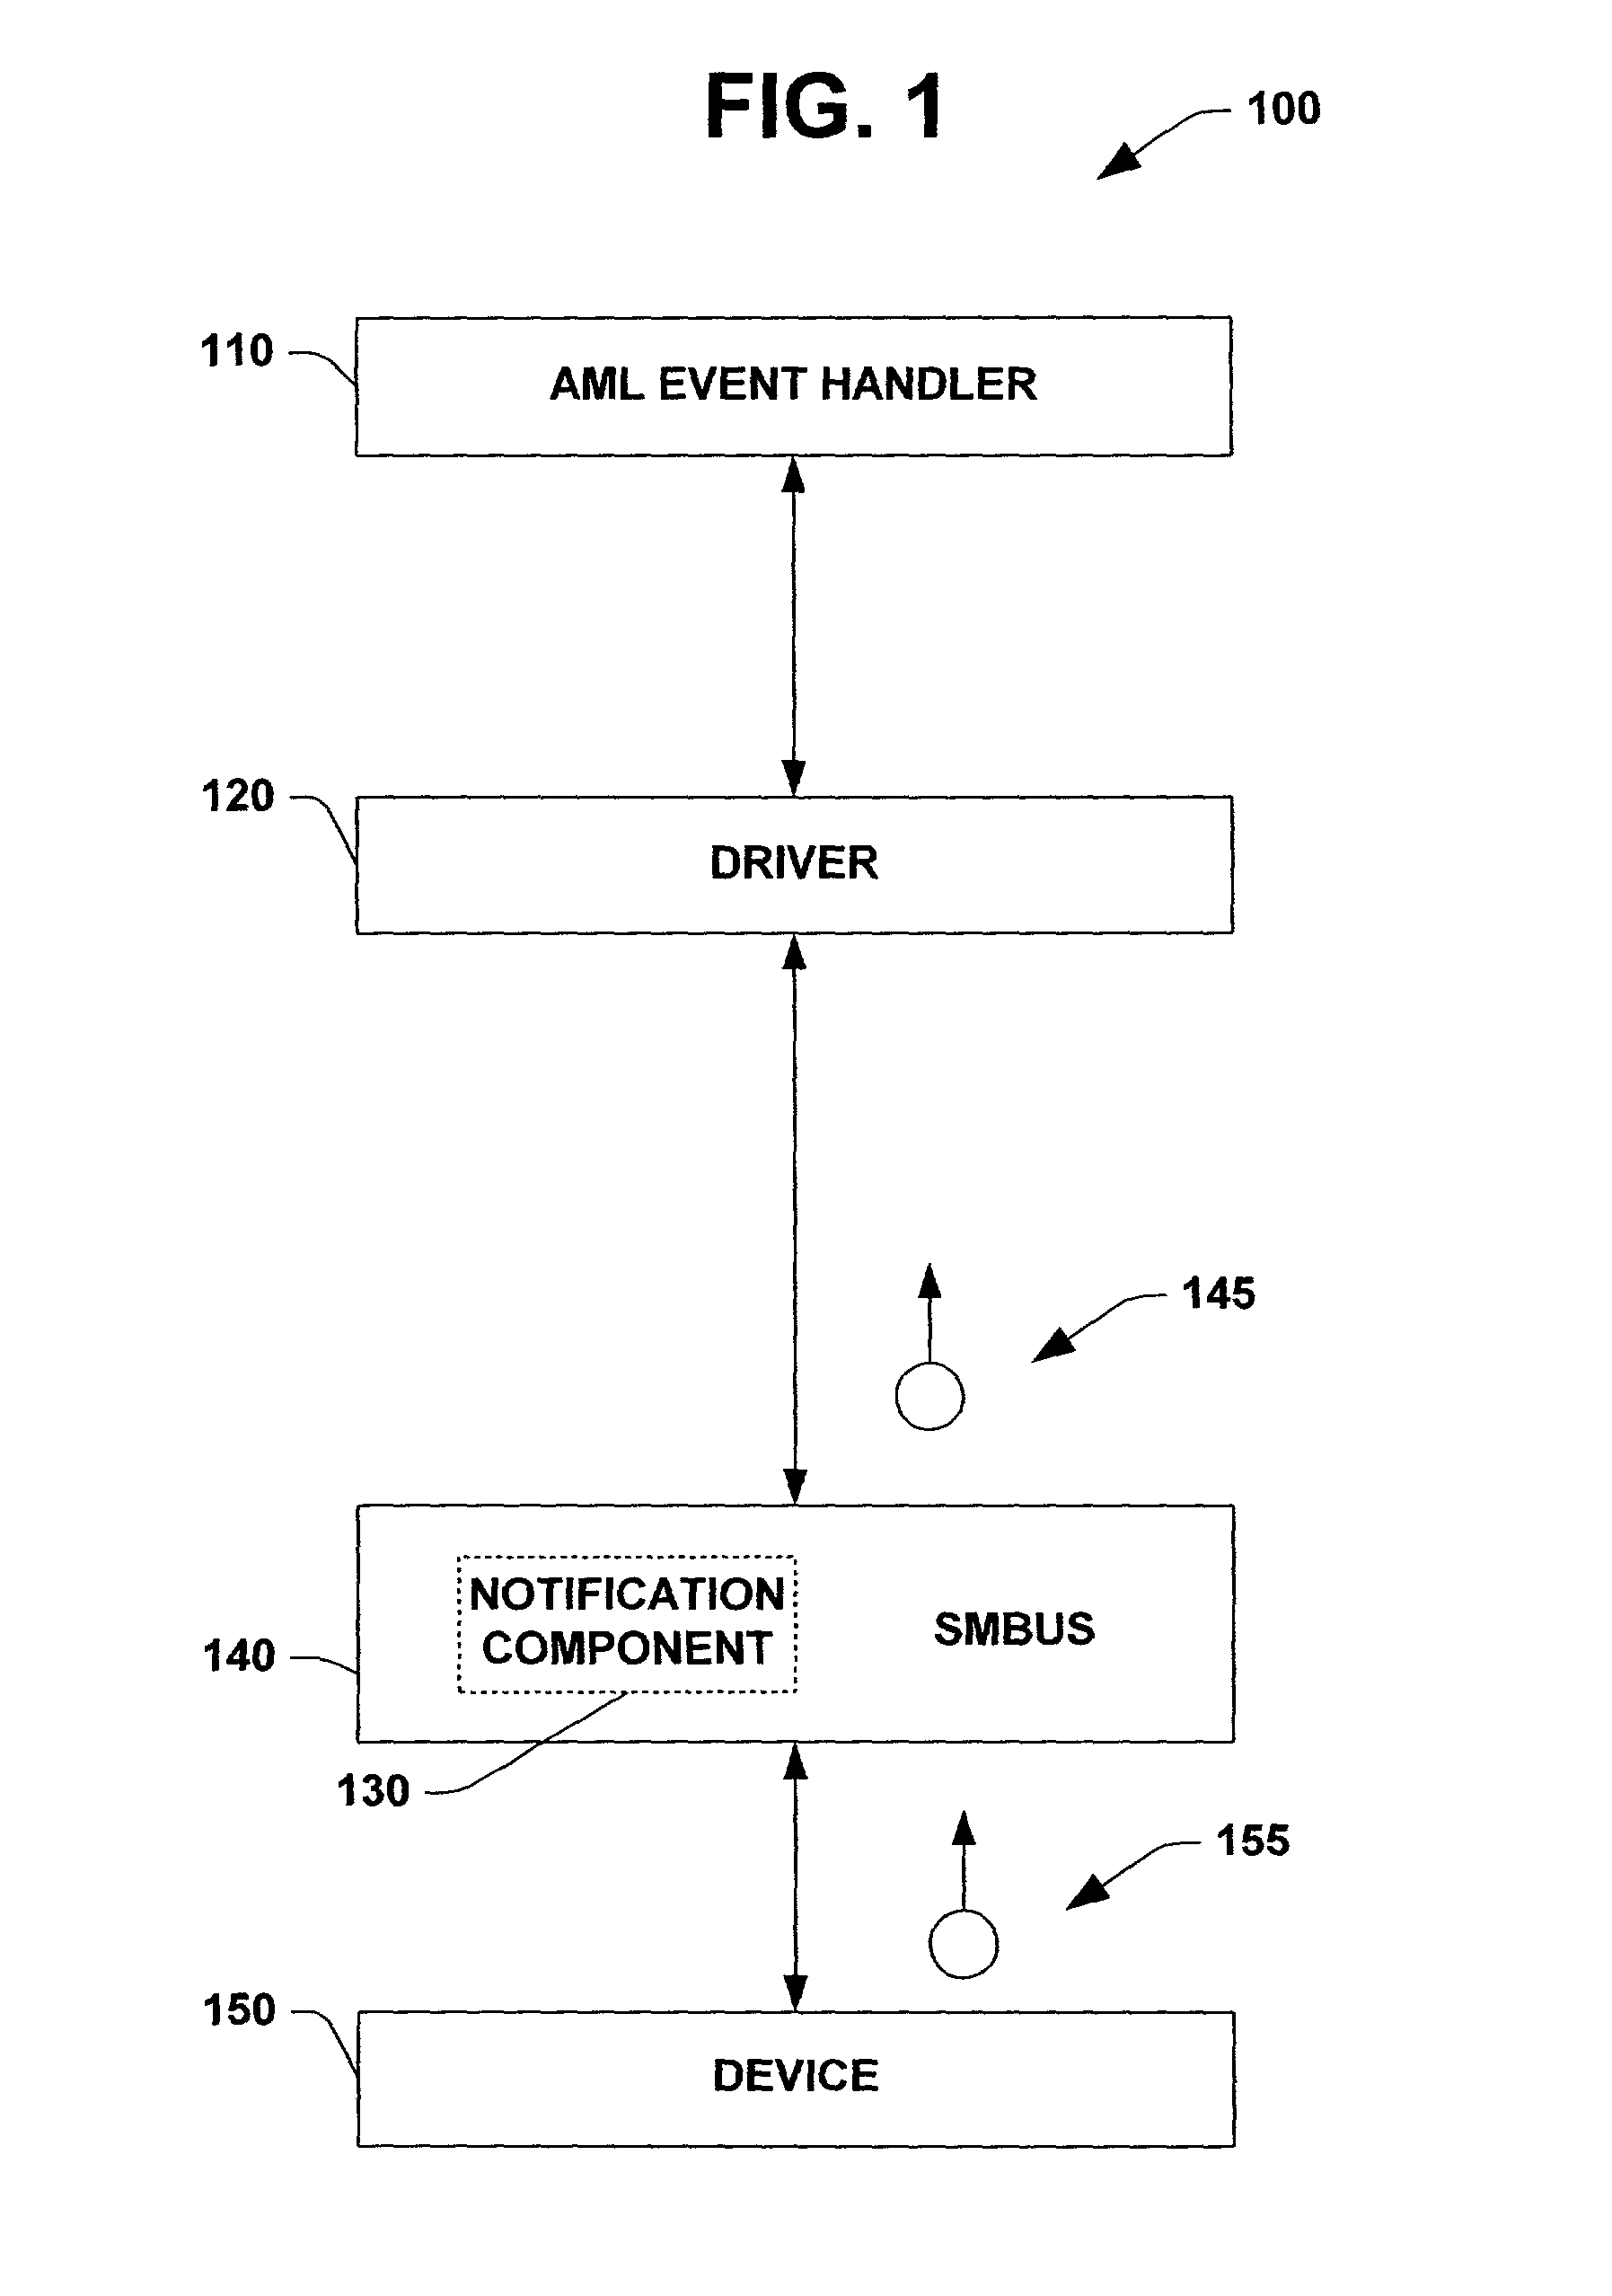 Employing three parameter buffer access in connection with SMBus notifications